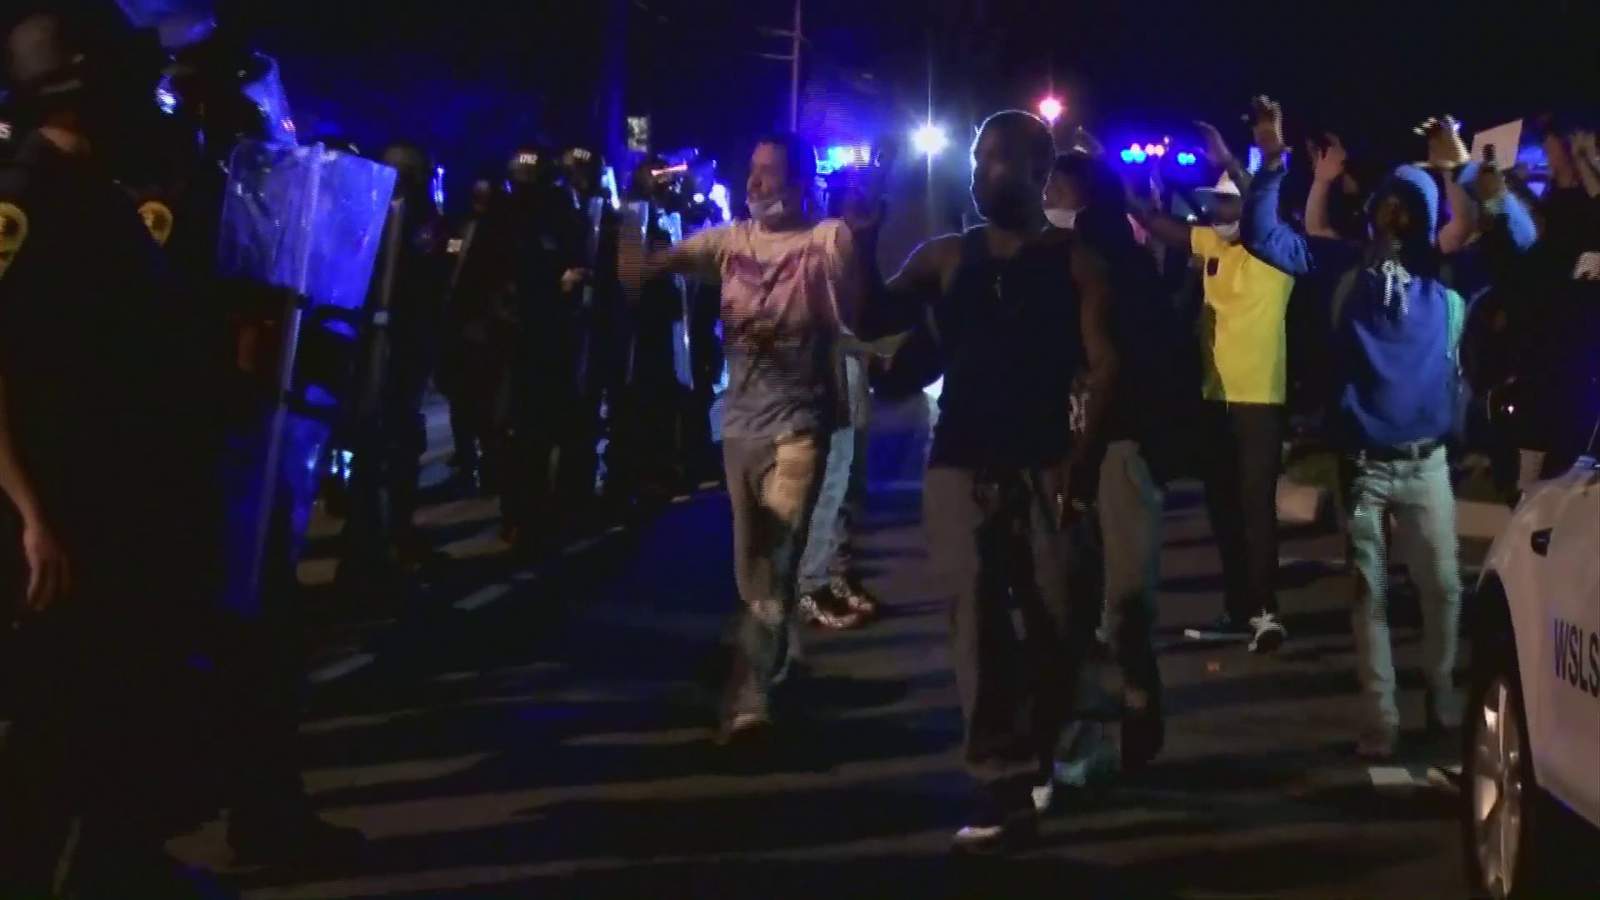 More arrests come after protesters shoot at officers Monday night in Lynchburg